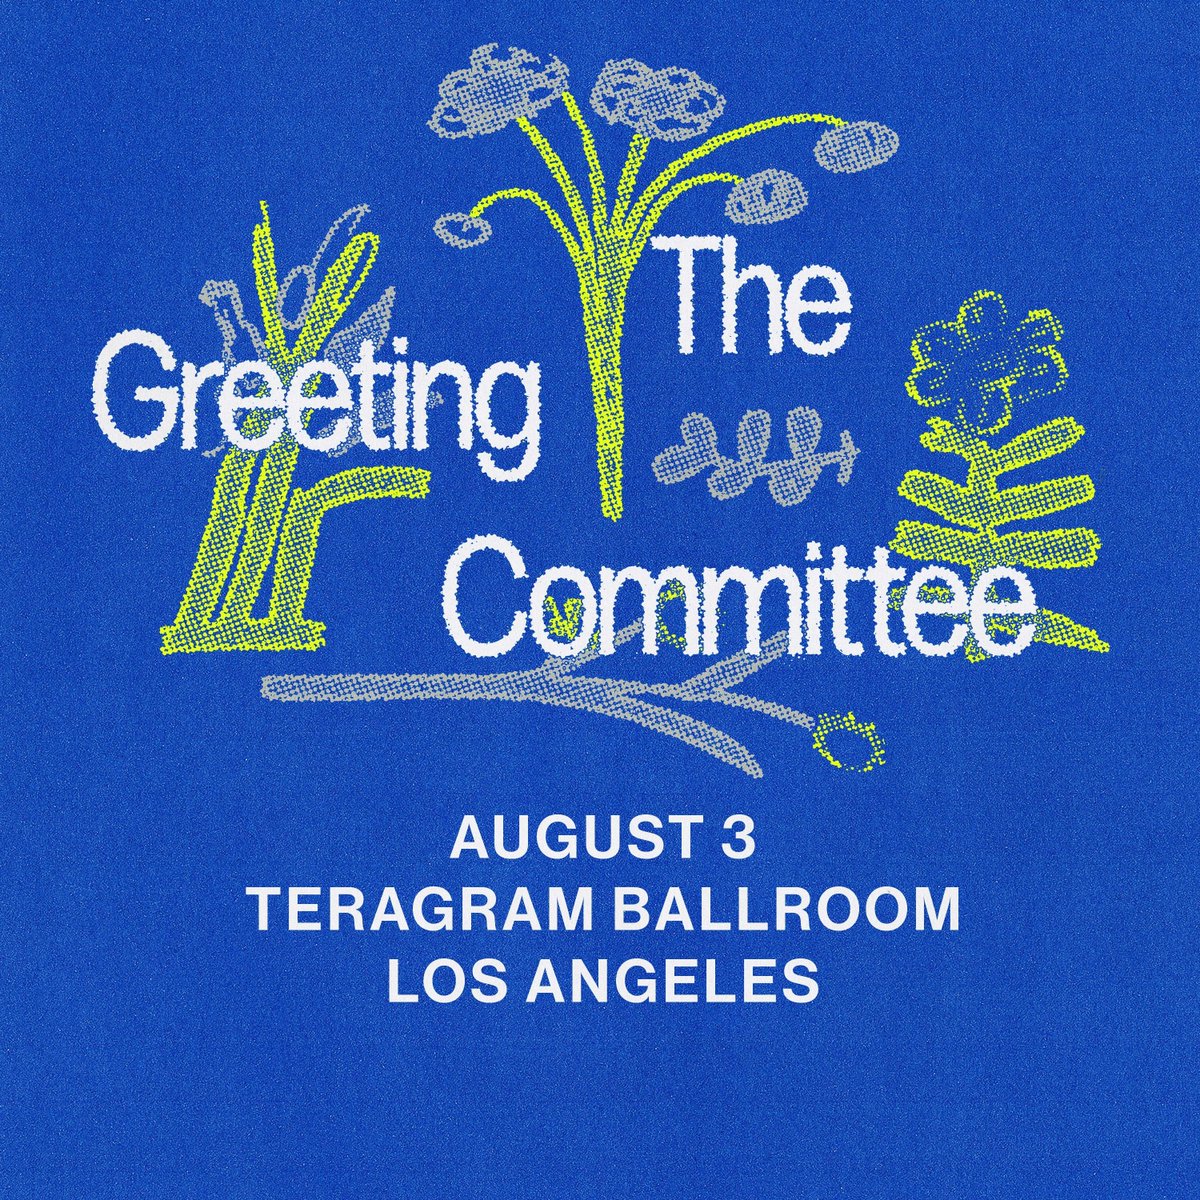 Experience The Greeting Committee live on August 3rd at Teragram Ballroom! 🎶 Grab your tickets now - link in bio! 🌟 #TheGreetingCommittee #TeragramBallroom